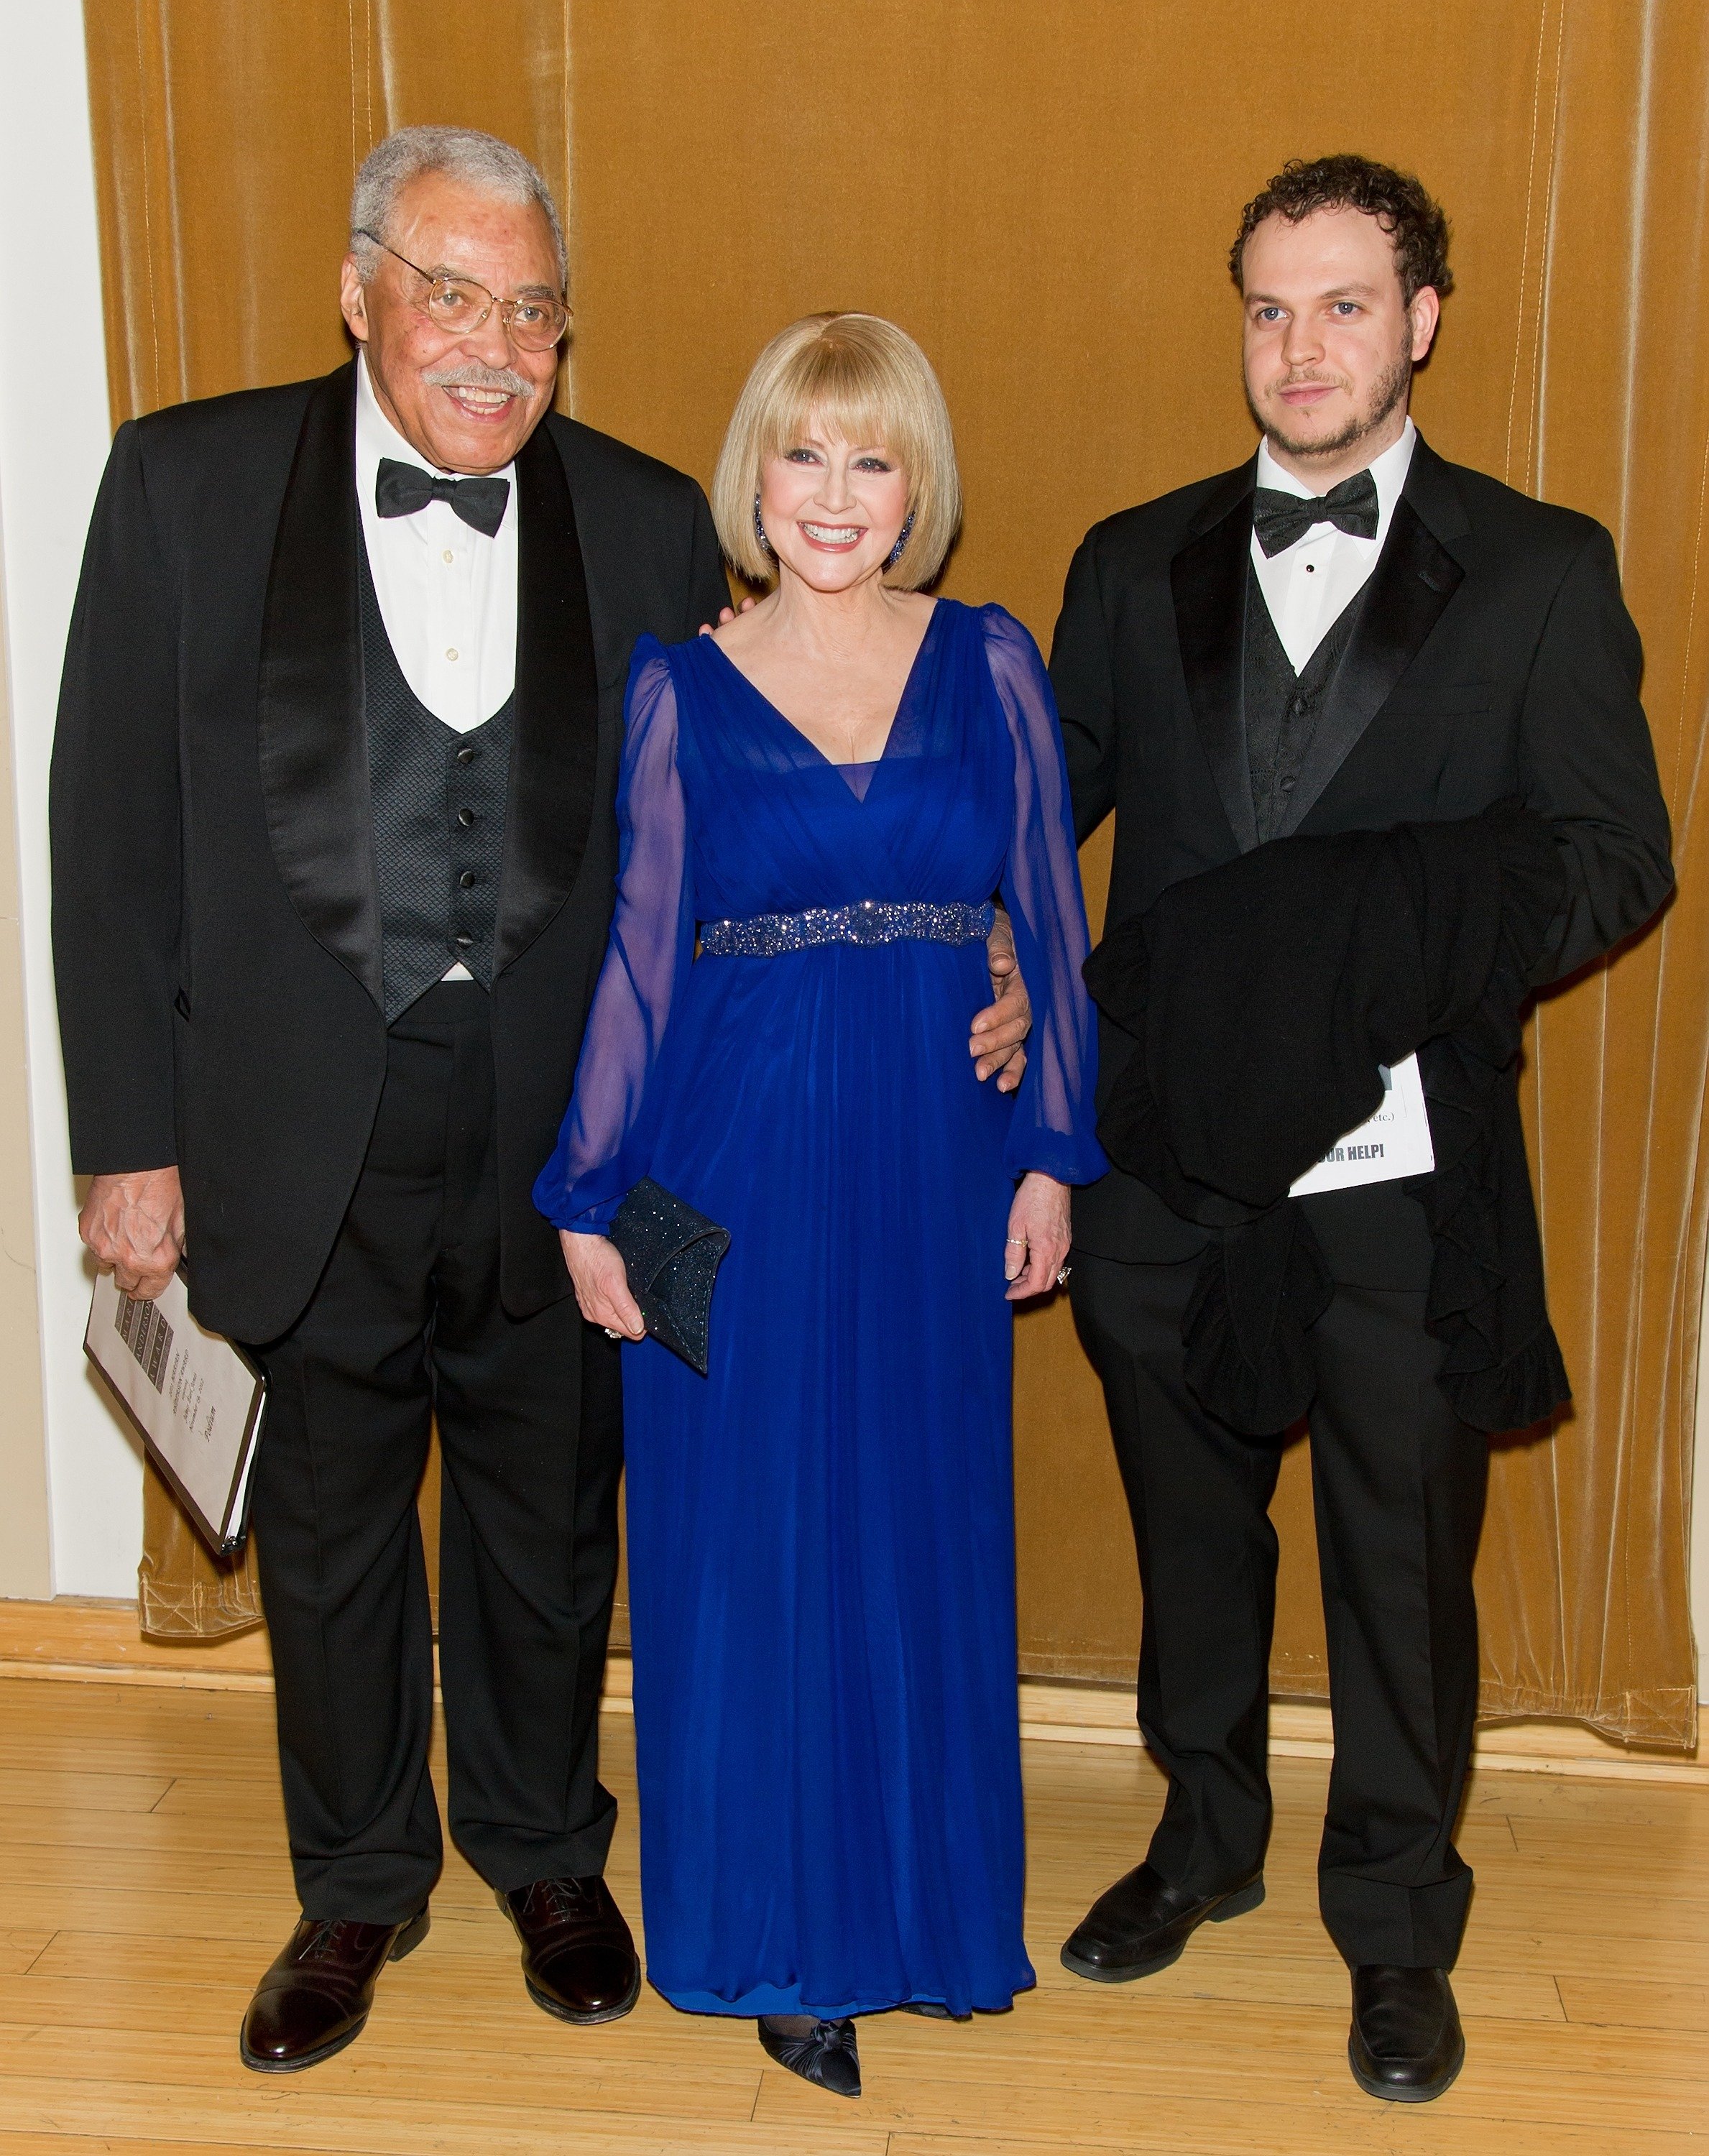 Actor James Earl Jones, wife Cecelia Hart and son Flynn Earl Jones attend the 2012 Marian Anderson awards gala at Kimmel Center for the Performing Arts on November 19, 2012 in Philadelphia, Pennsylvania | Source: Getty Images